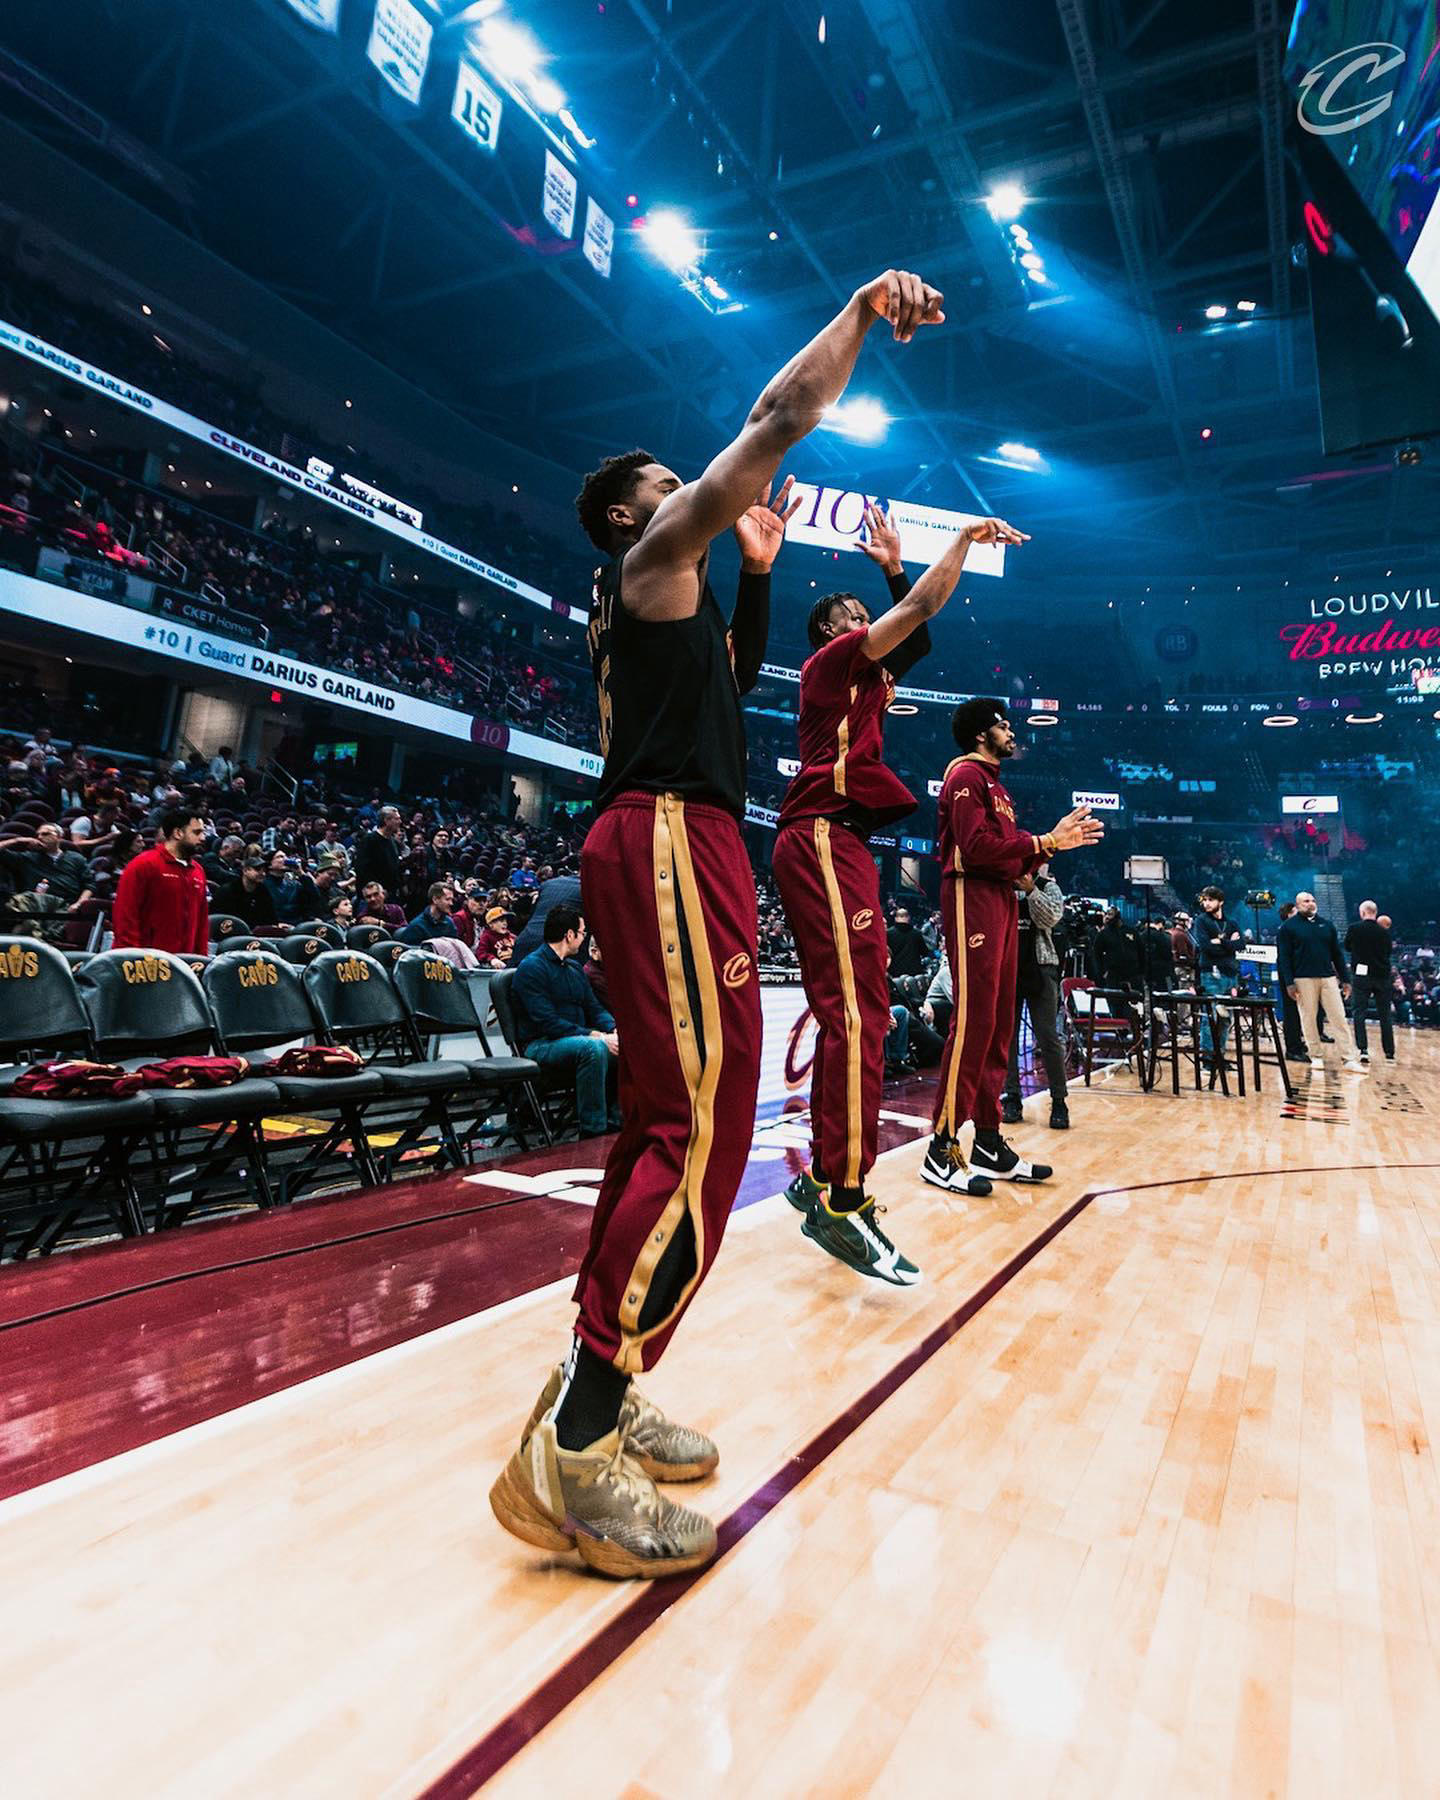 Cleveland Cavaliers - In sync for game time